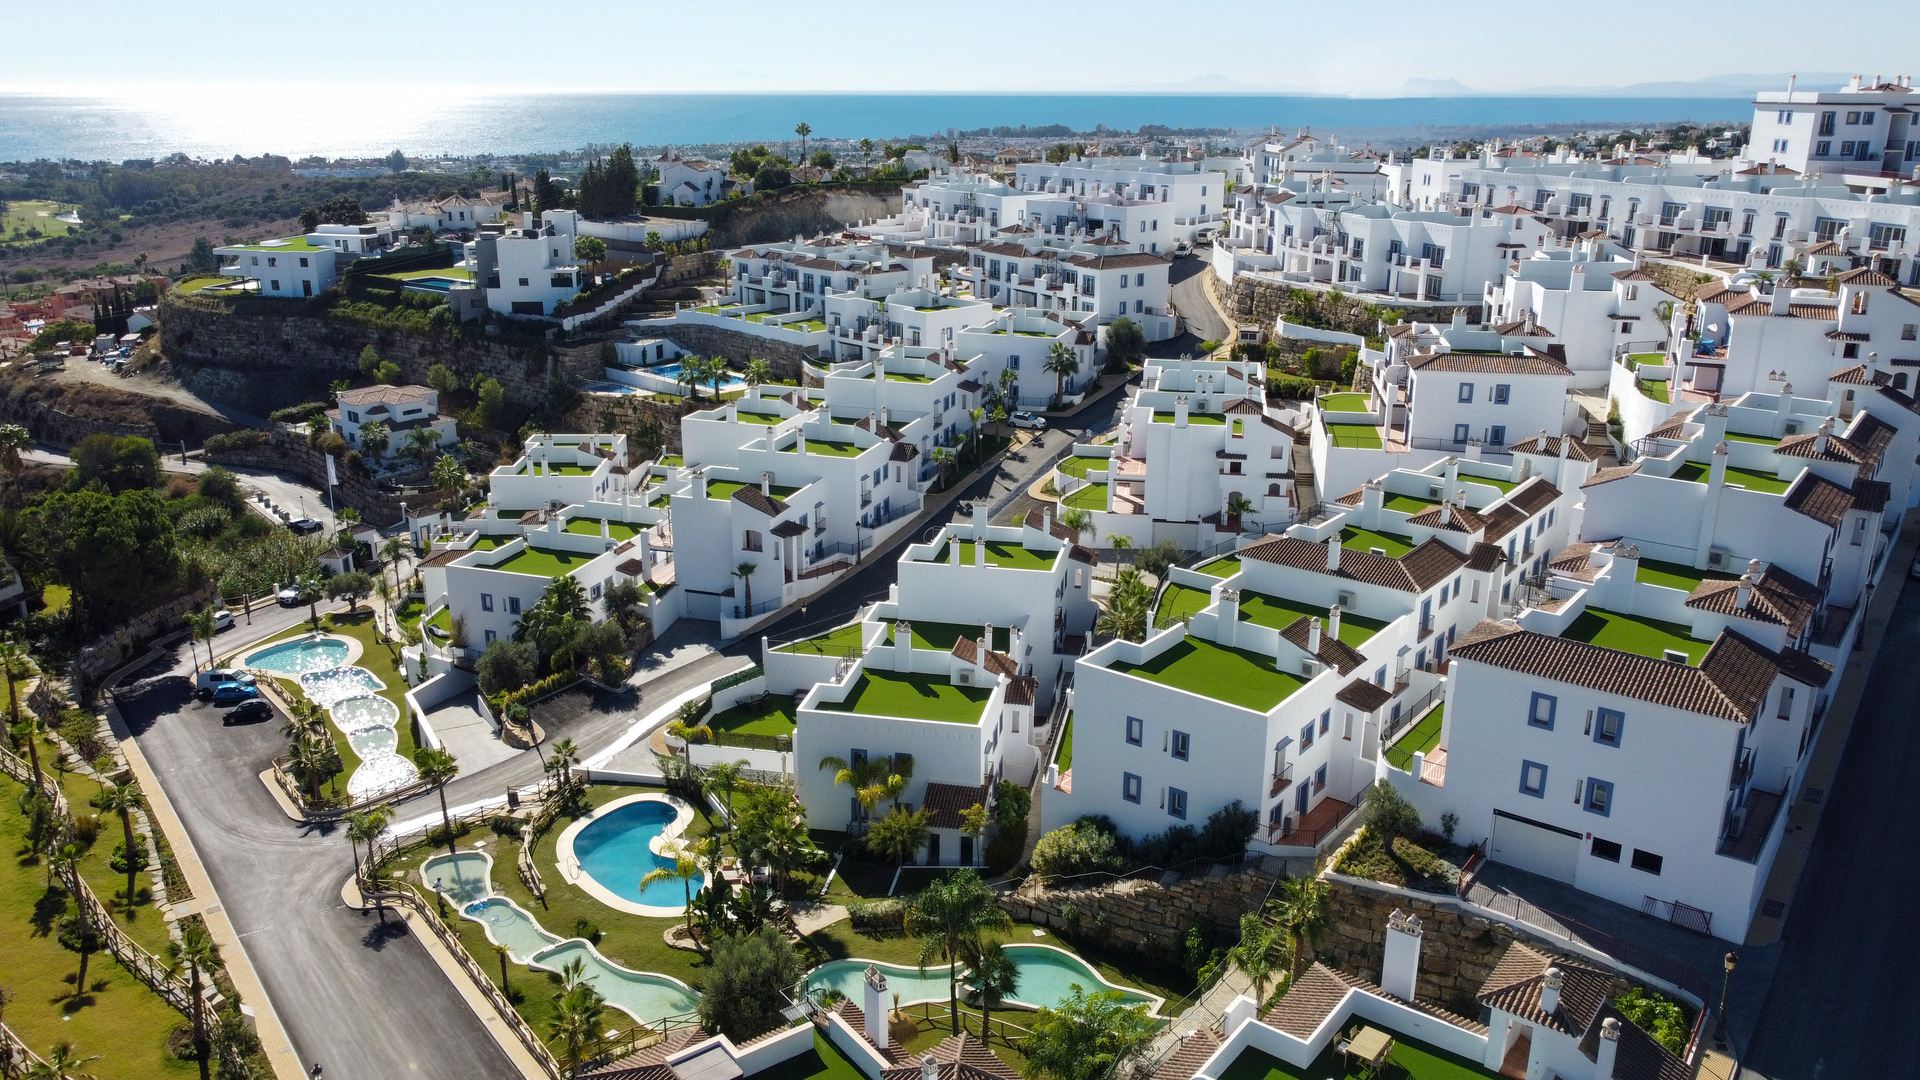 Modern Benahavís apartments with a traditional Andalusian village atmosphere